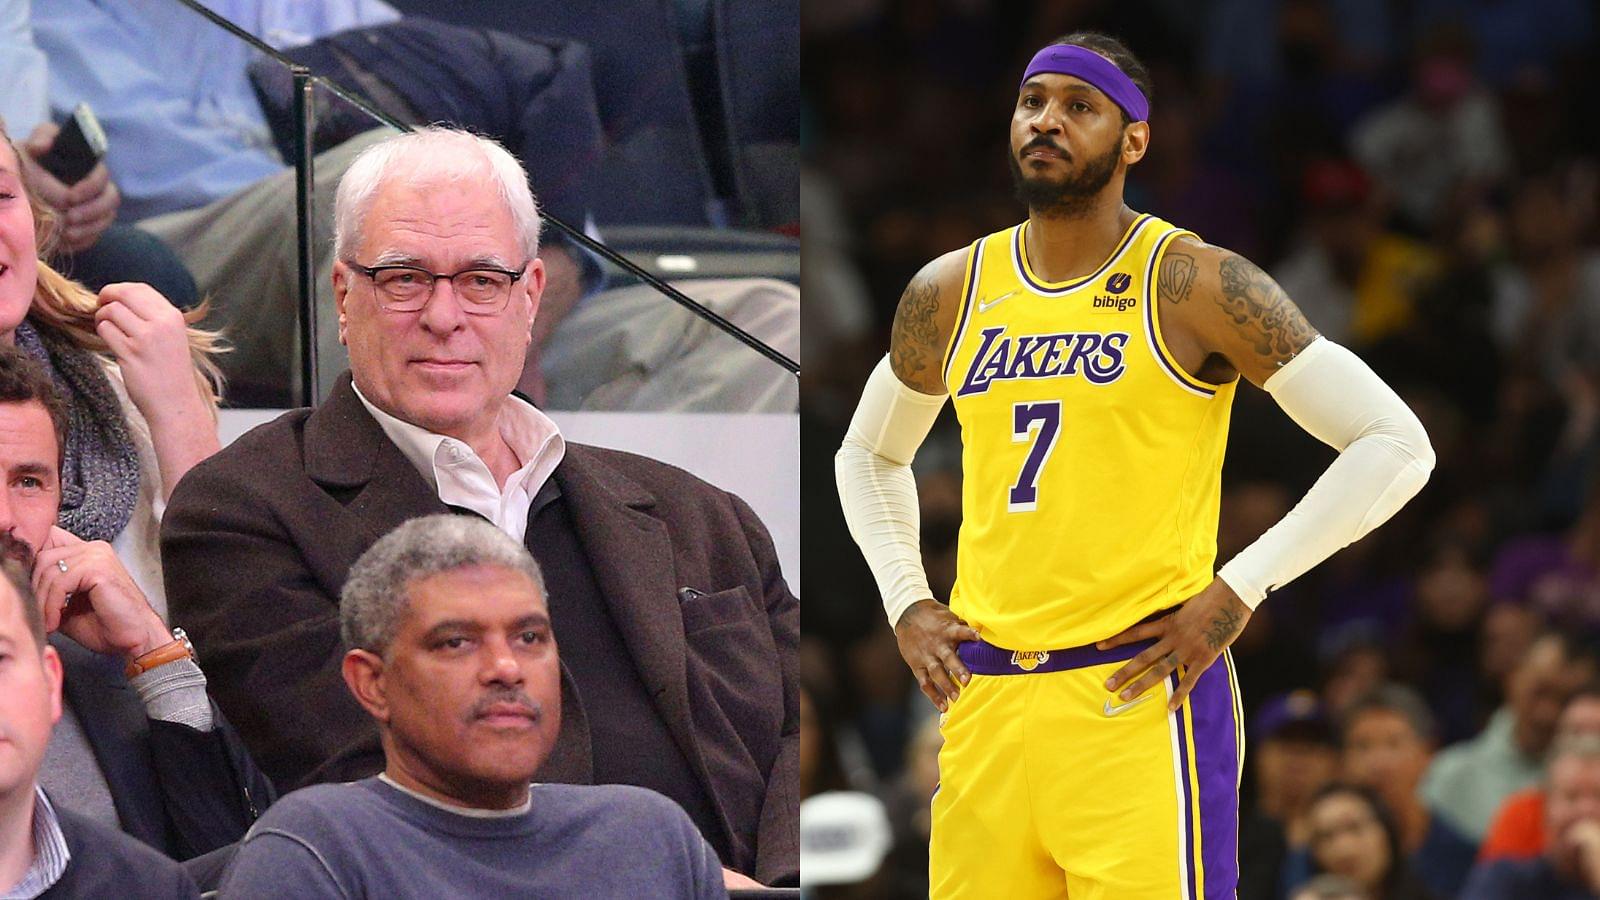 “Phil Jackson hated that I learned 'Triangle Offense' from Kobe Bryant and Michael Jordan”: Carmelo Anthony didn't have a good relationship with Knicks President